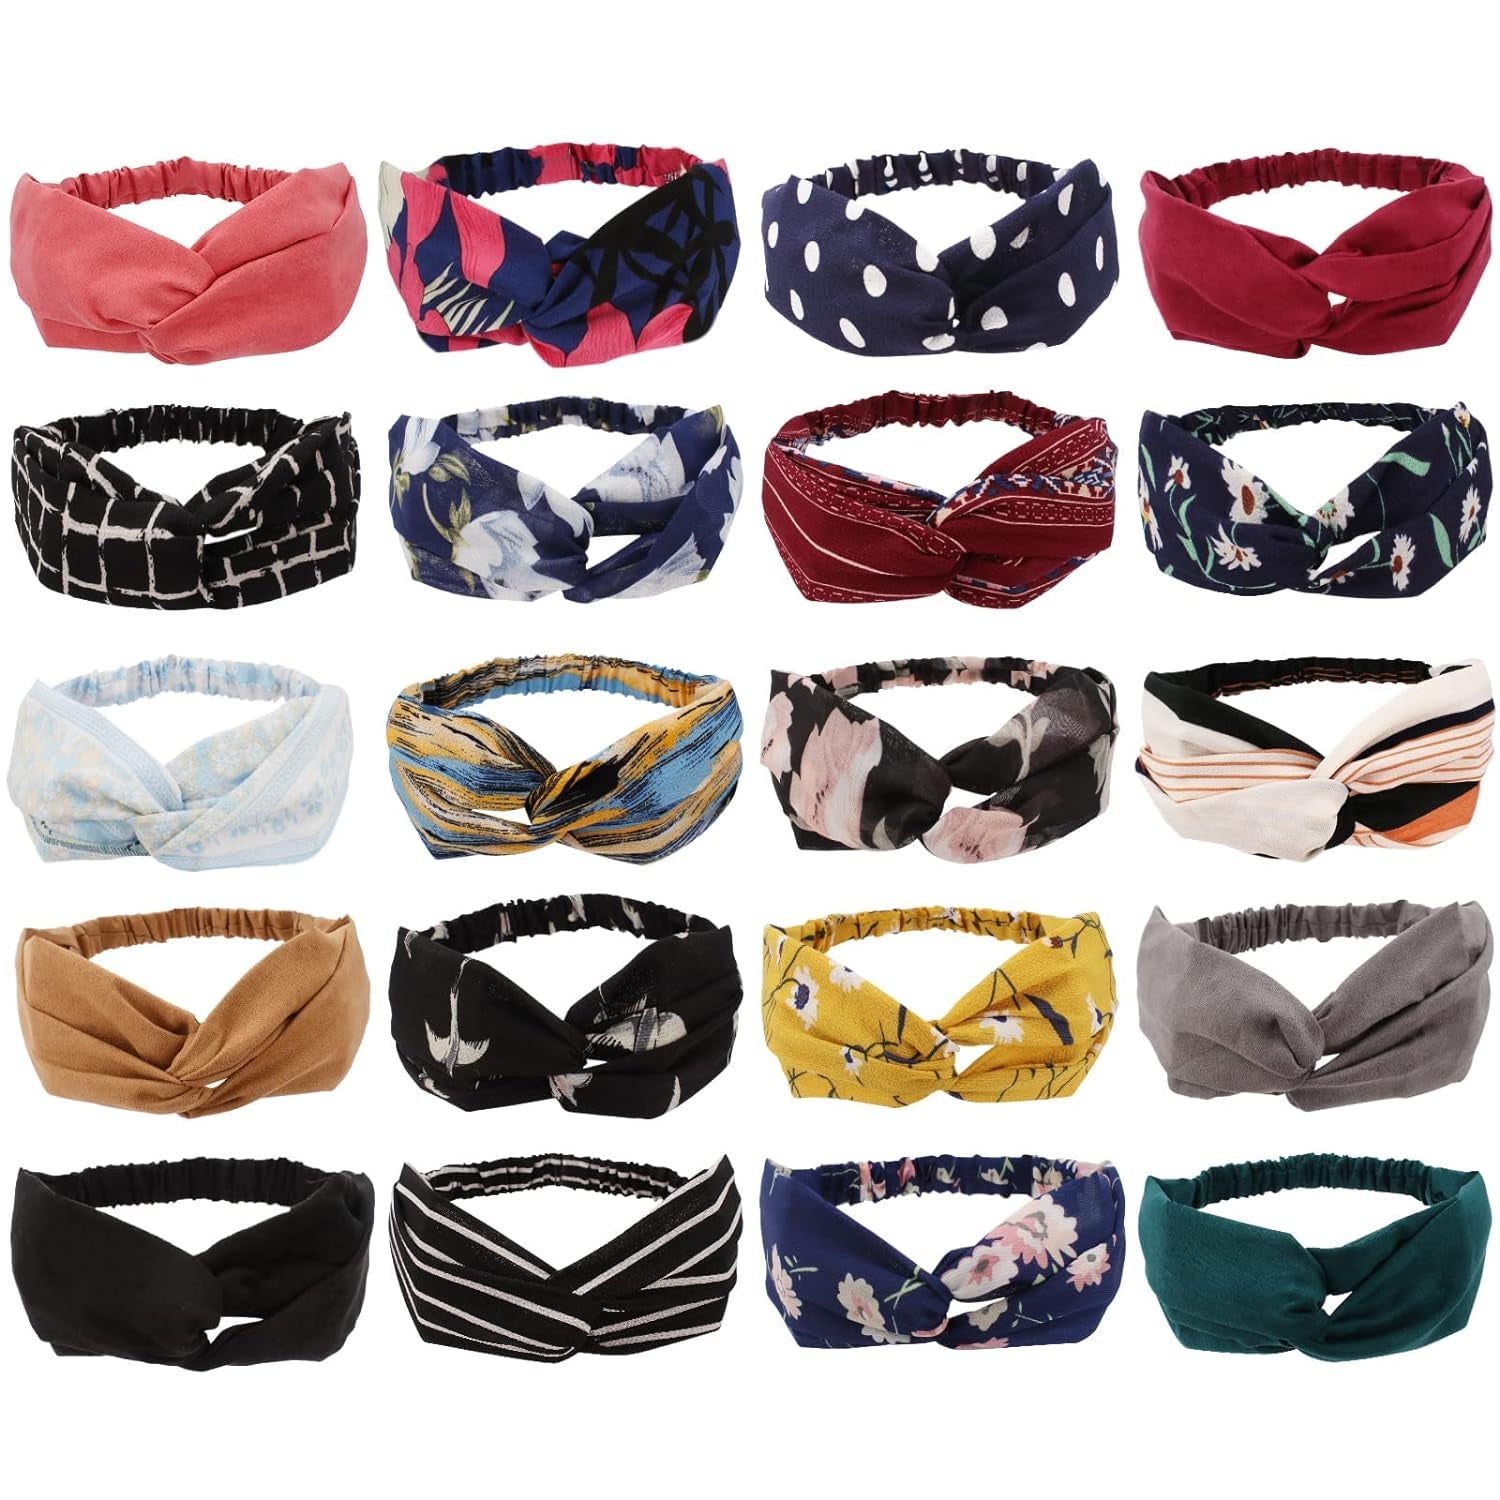 20 Pack Boho Headbands for Women Womens Headbands Head Bands No Slip Fashion for Women Hair Bands Boho Knotted Turban Fashion Headbands for Wigs Hair Accessories for Women and Girls…